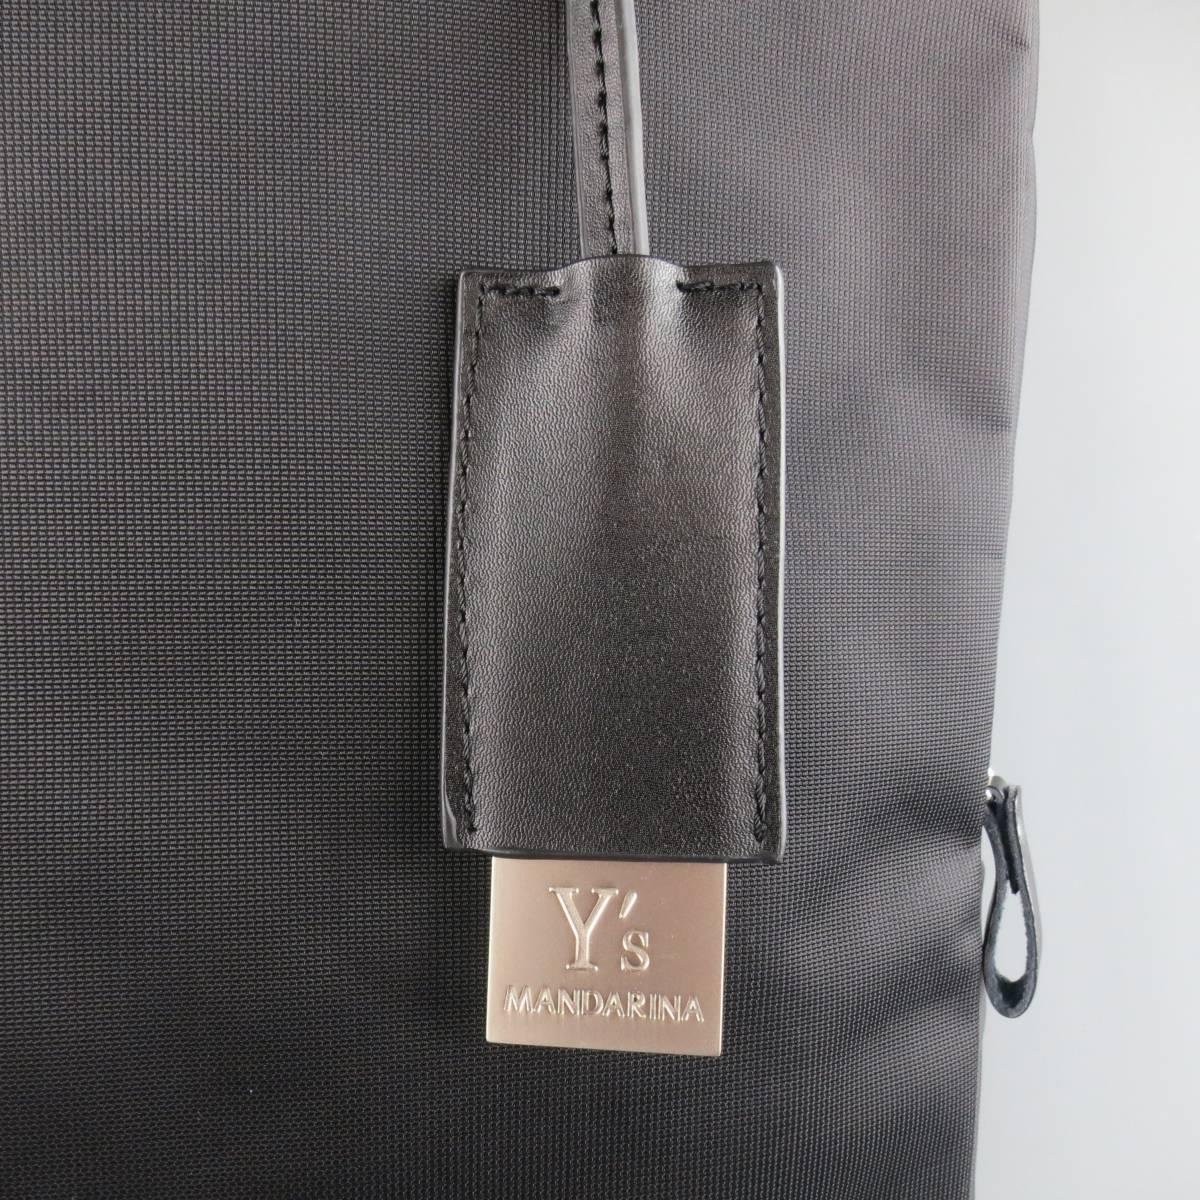 Y's YOHJI YAMAMOTO MANDARINA tote bag in a black nylon featuring a rectangular shape, double webbing top handles, metal tag, frontal zip compartment with leather tag, optional crossbody shoulder strap, and internal double snap sections.
 
Excellent